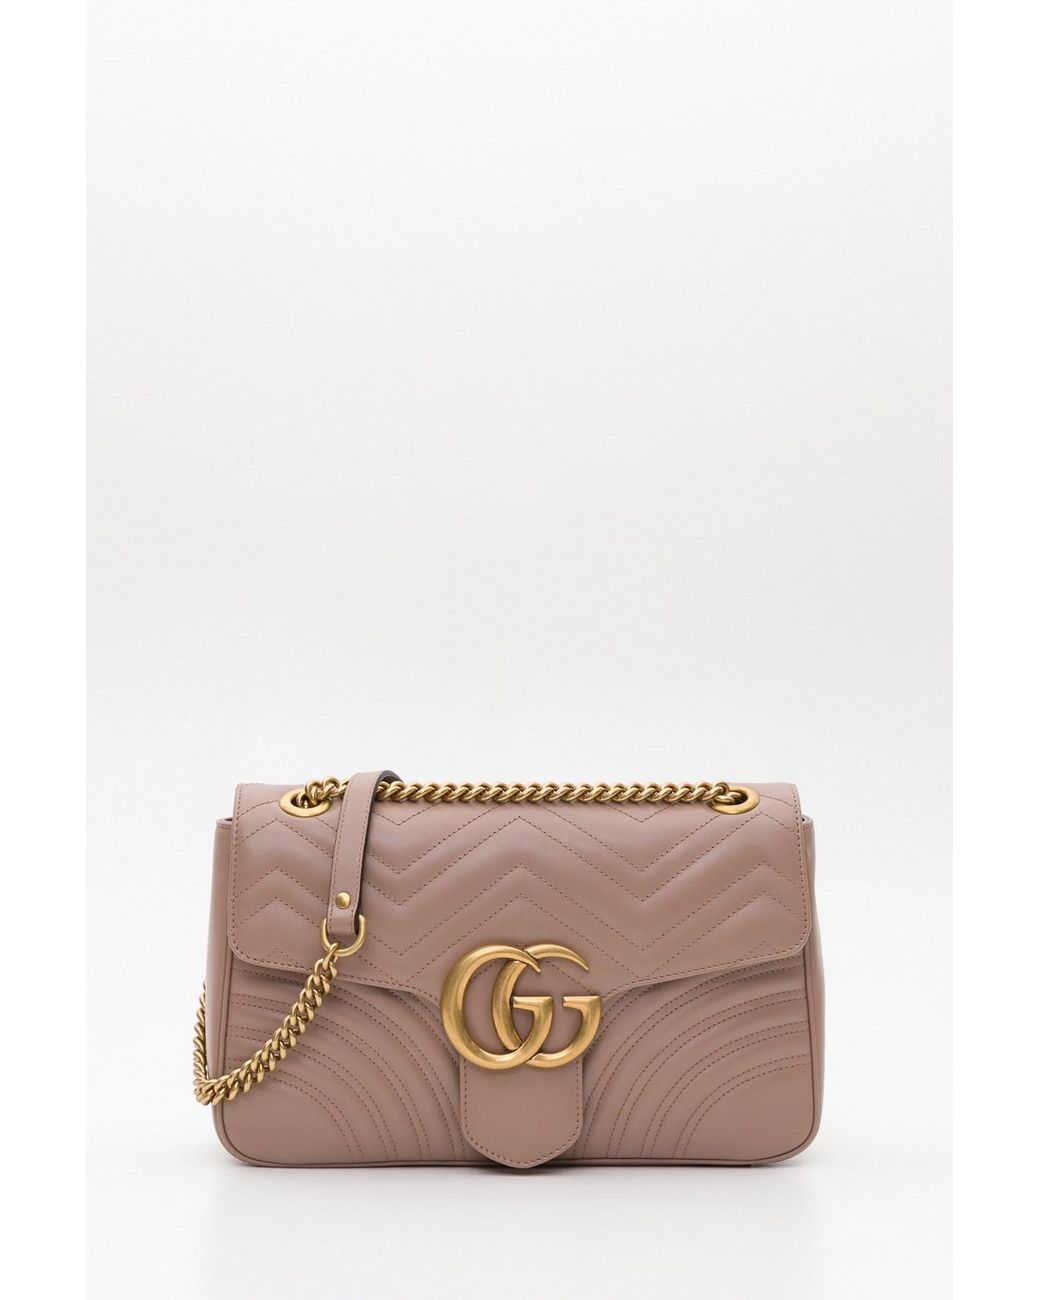 Gucci GG Marmont 2.0 Medium Shoulder Bag In Lion Trap. Ang Chev. Cuore ...